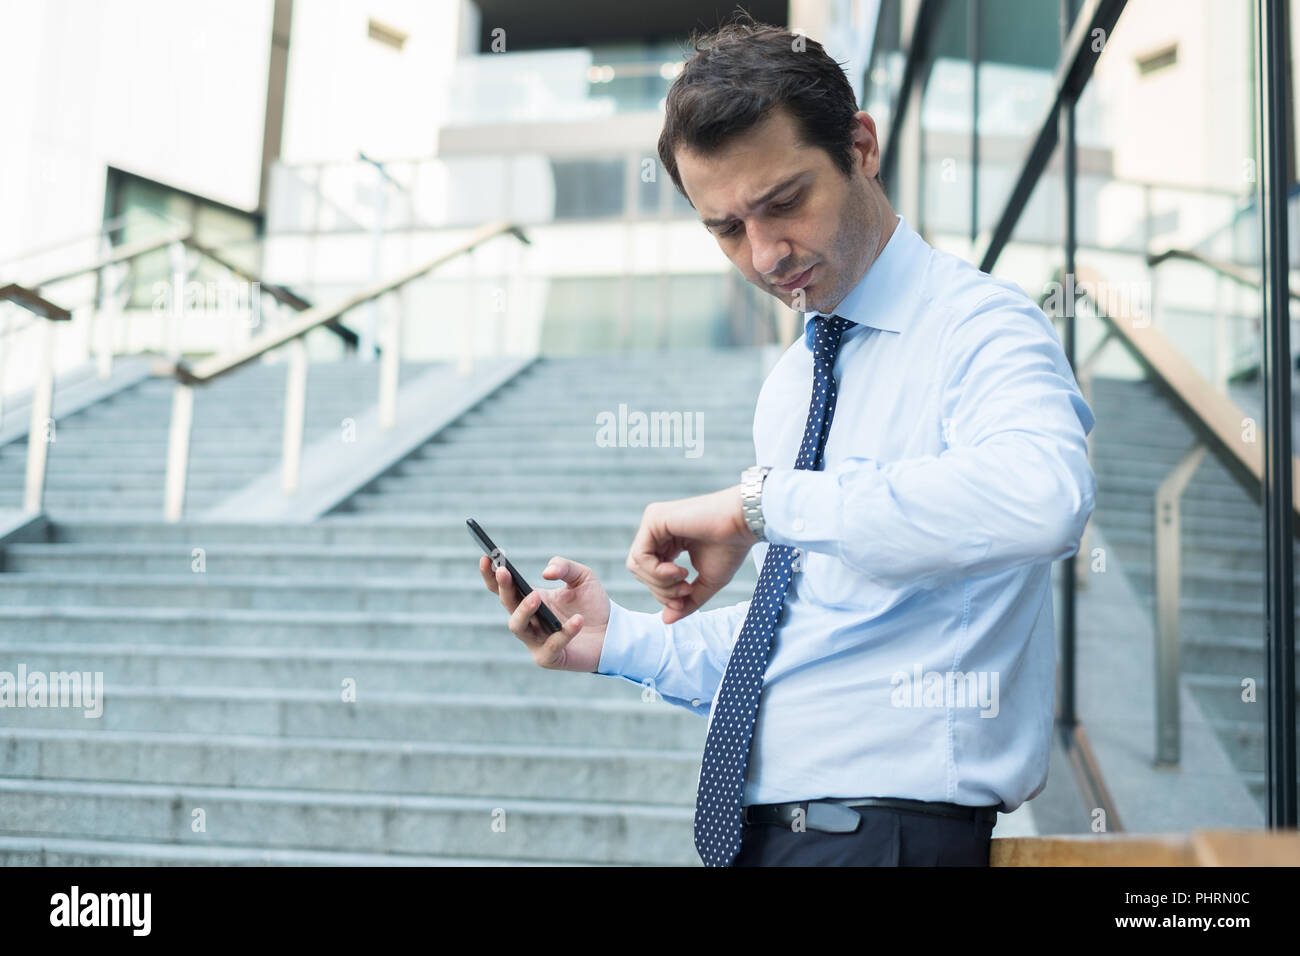 Busy Businessman Checking The Time On His Wristwatch Stock Photo Alamy